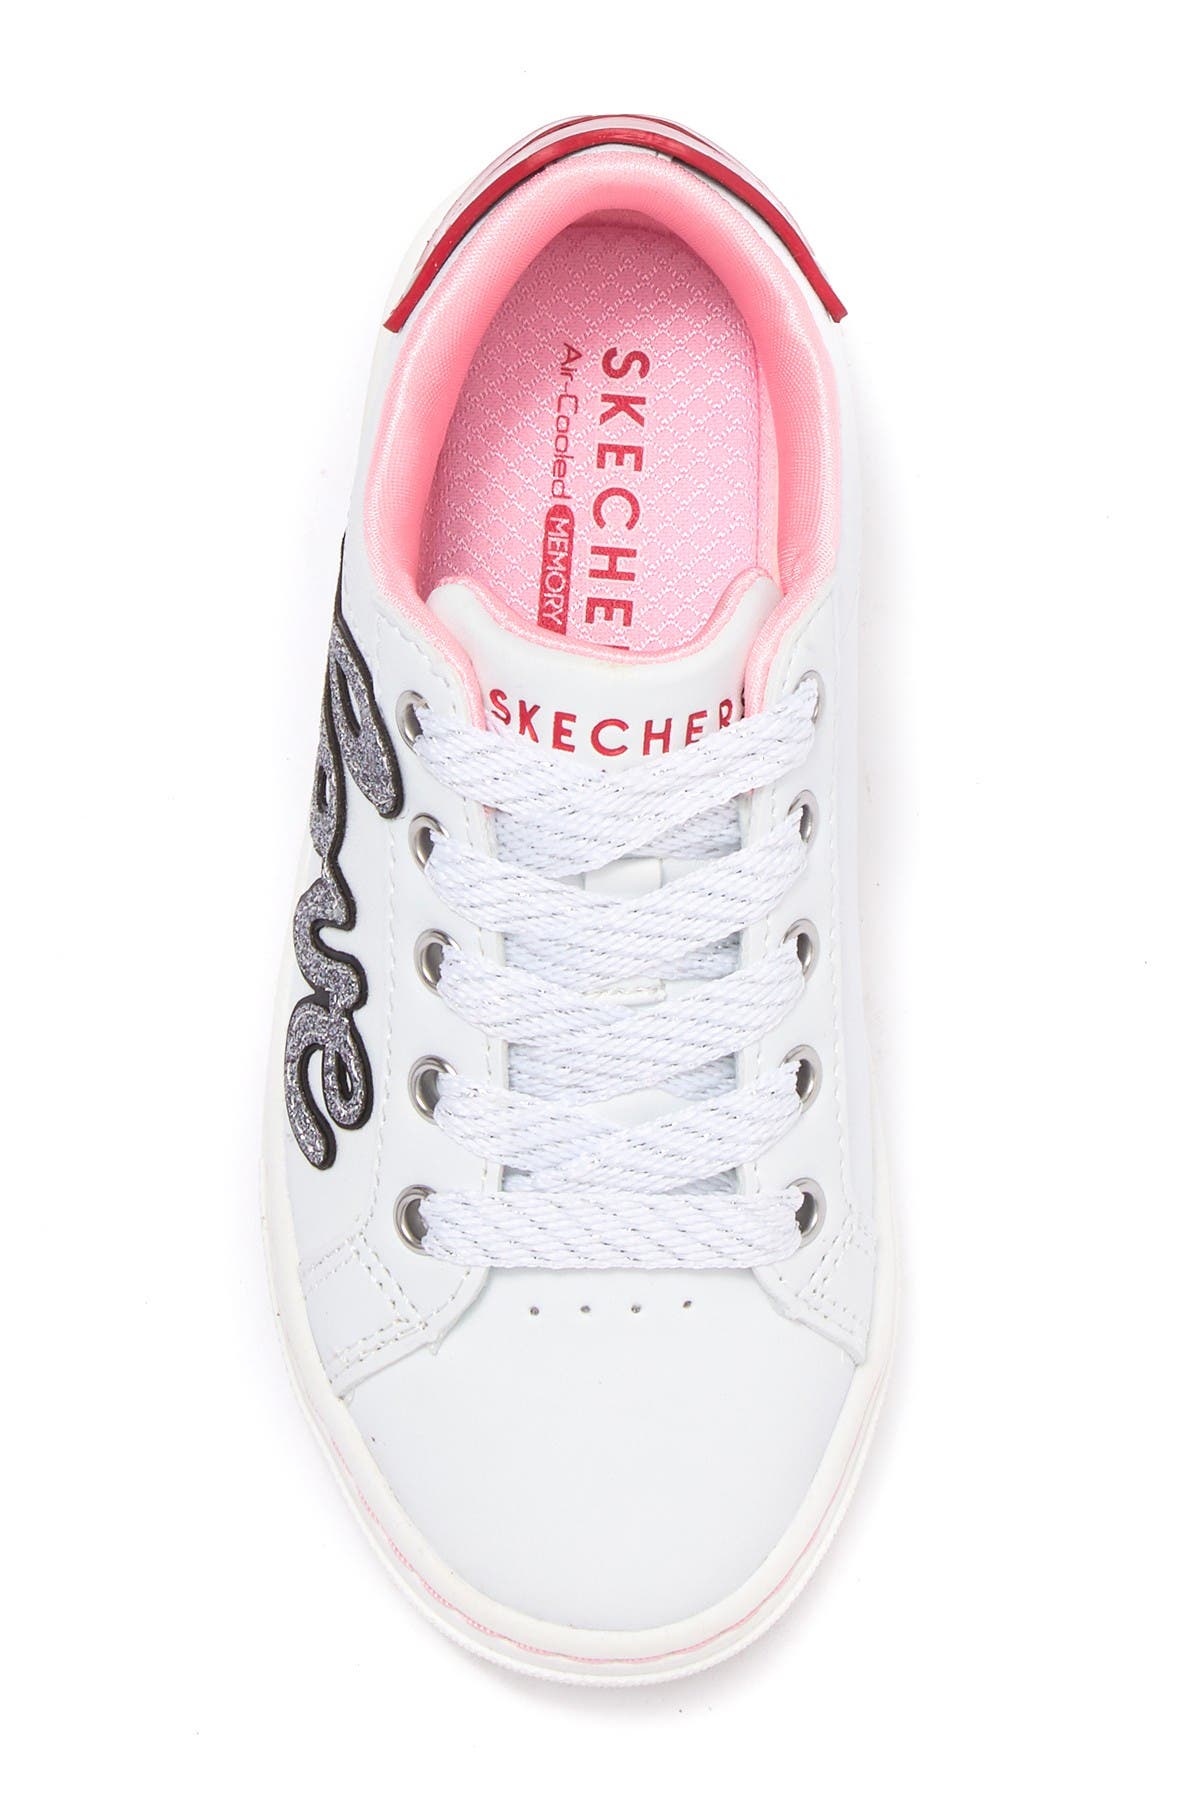 skechers goldie sealed with a kiss